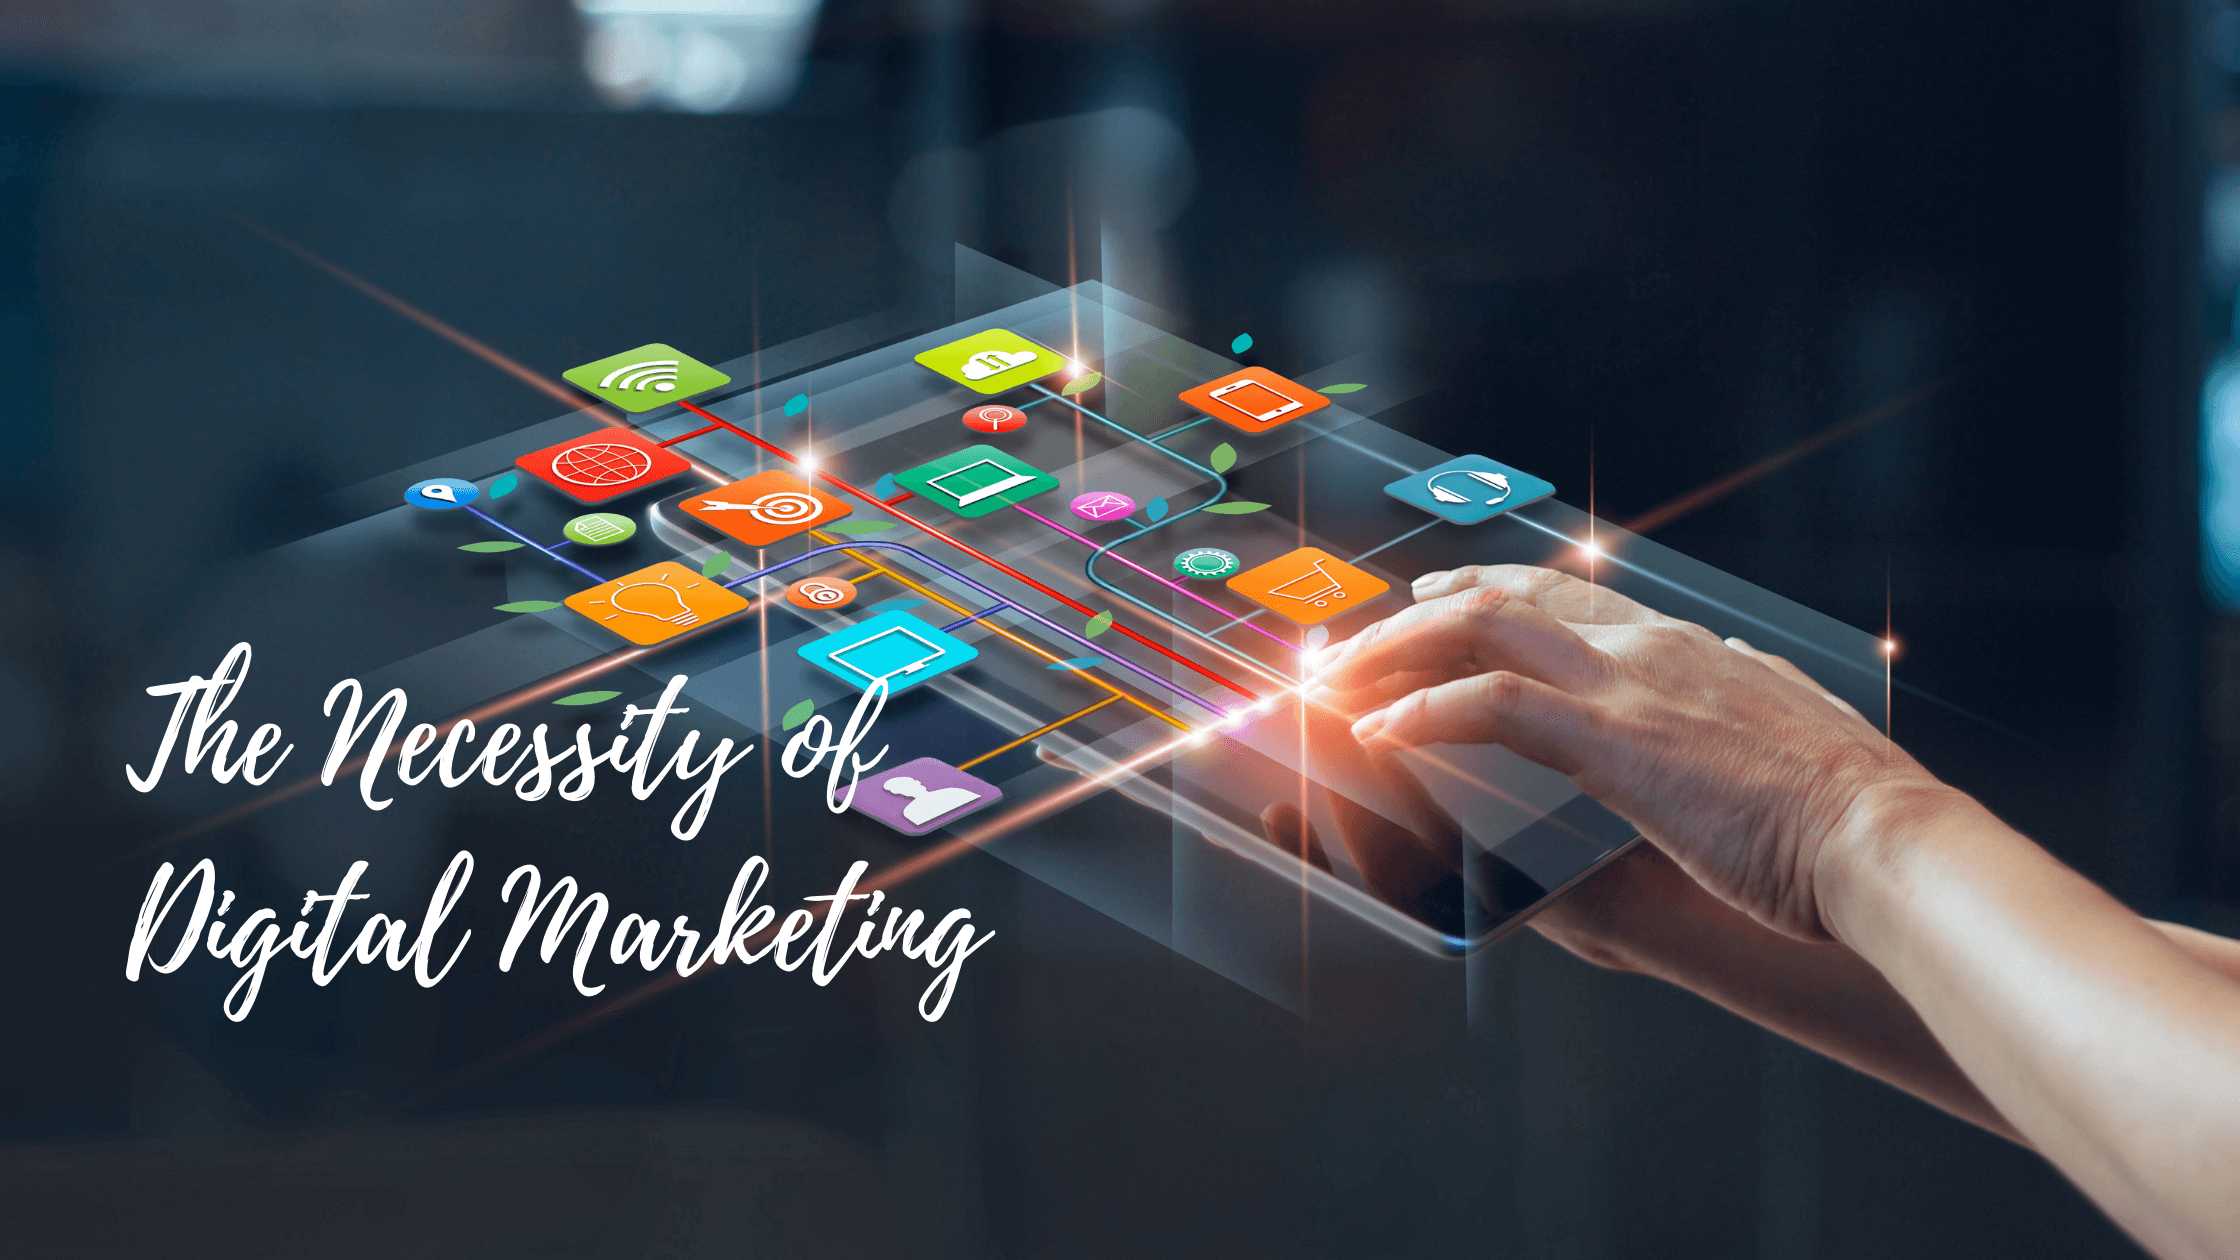 7 Reasons Why You Need Digital Marketing Services